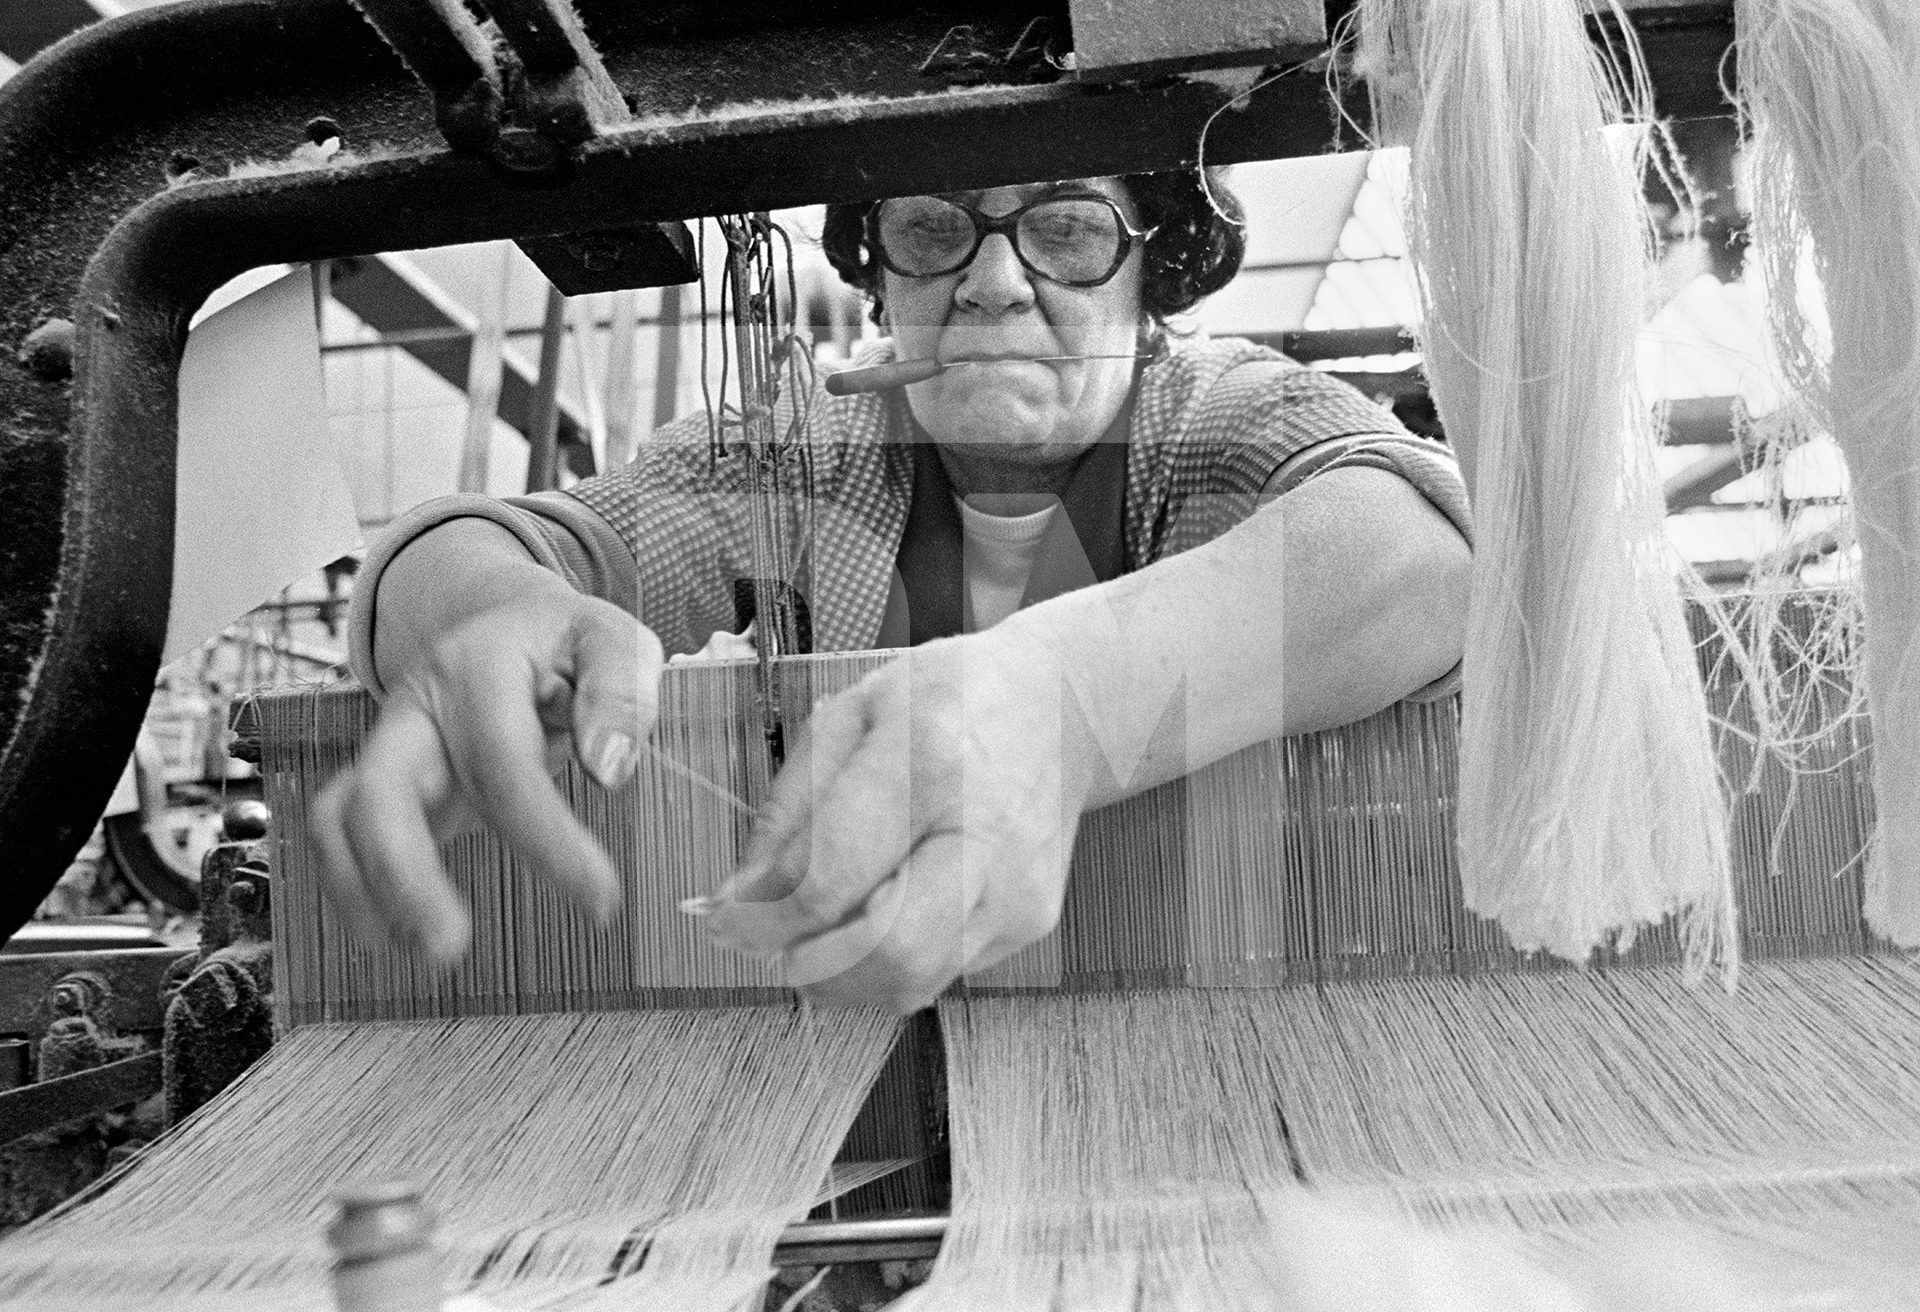 A weaver works at a loom in her alley, ‘taking up an end’. May 1976 by Daniel Meadows